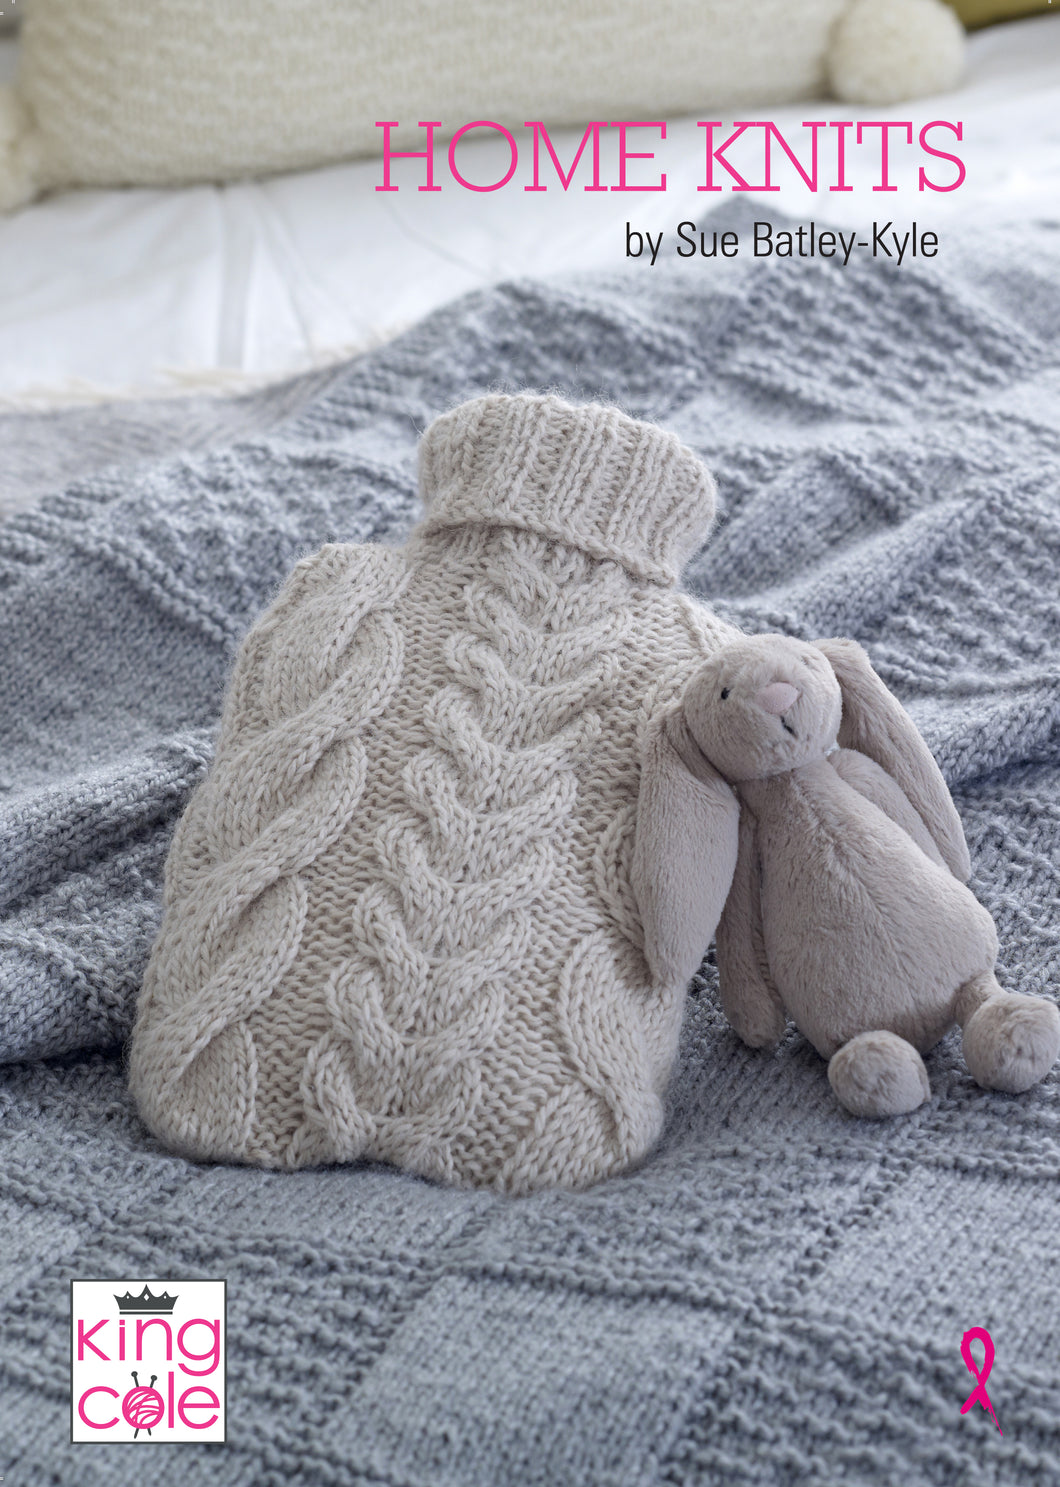 Home Knits by Sue Batley-Kyle